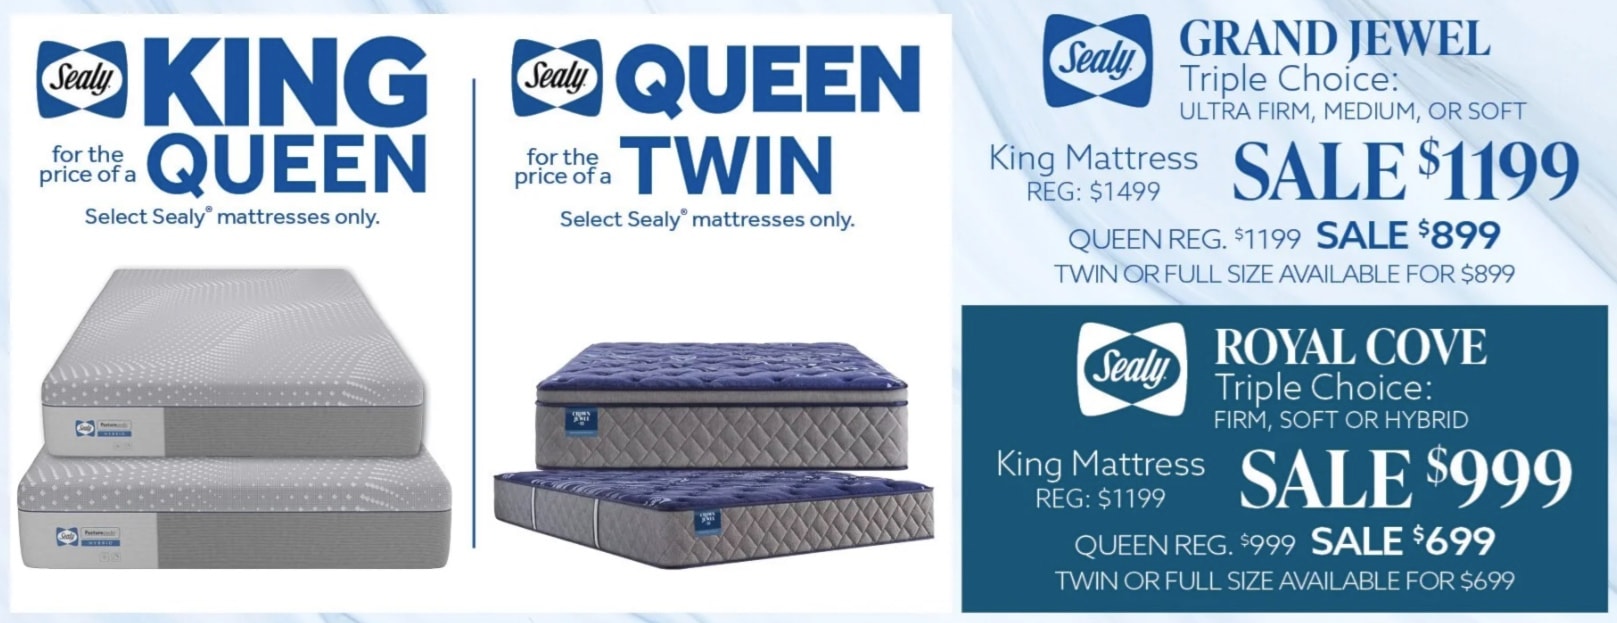 Simon's King for Queen, Queen for twin mattress event is going on now! Buy select Sealy king mattresses and pay the queen price. Buy select queen or full sealy mattresses and pay the twin price. 